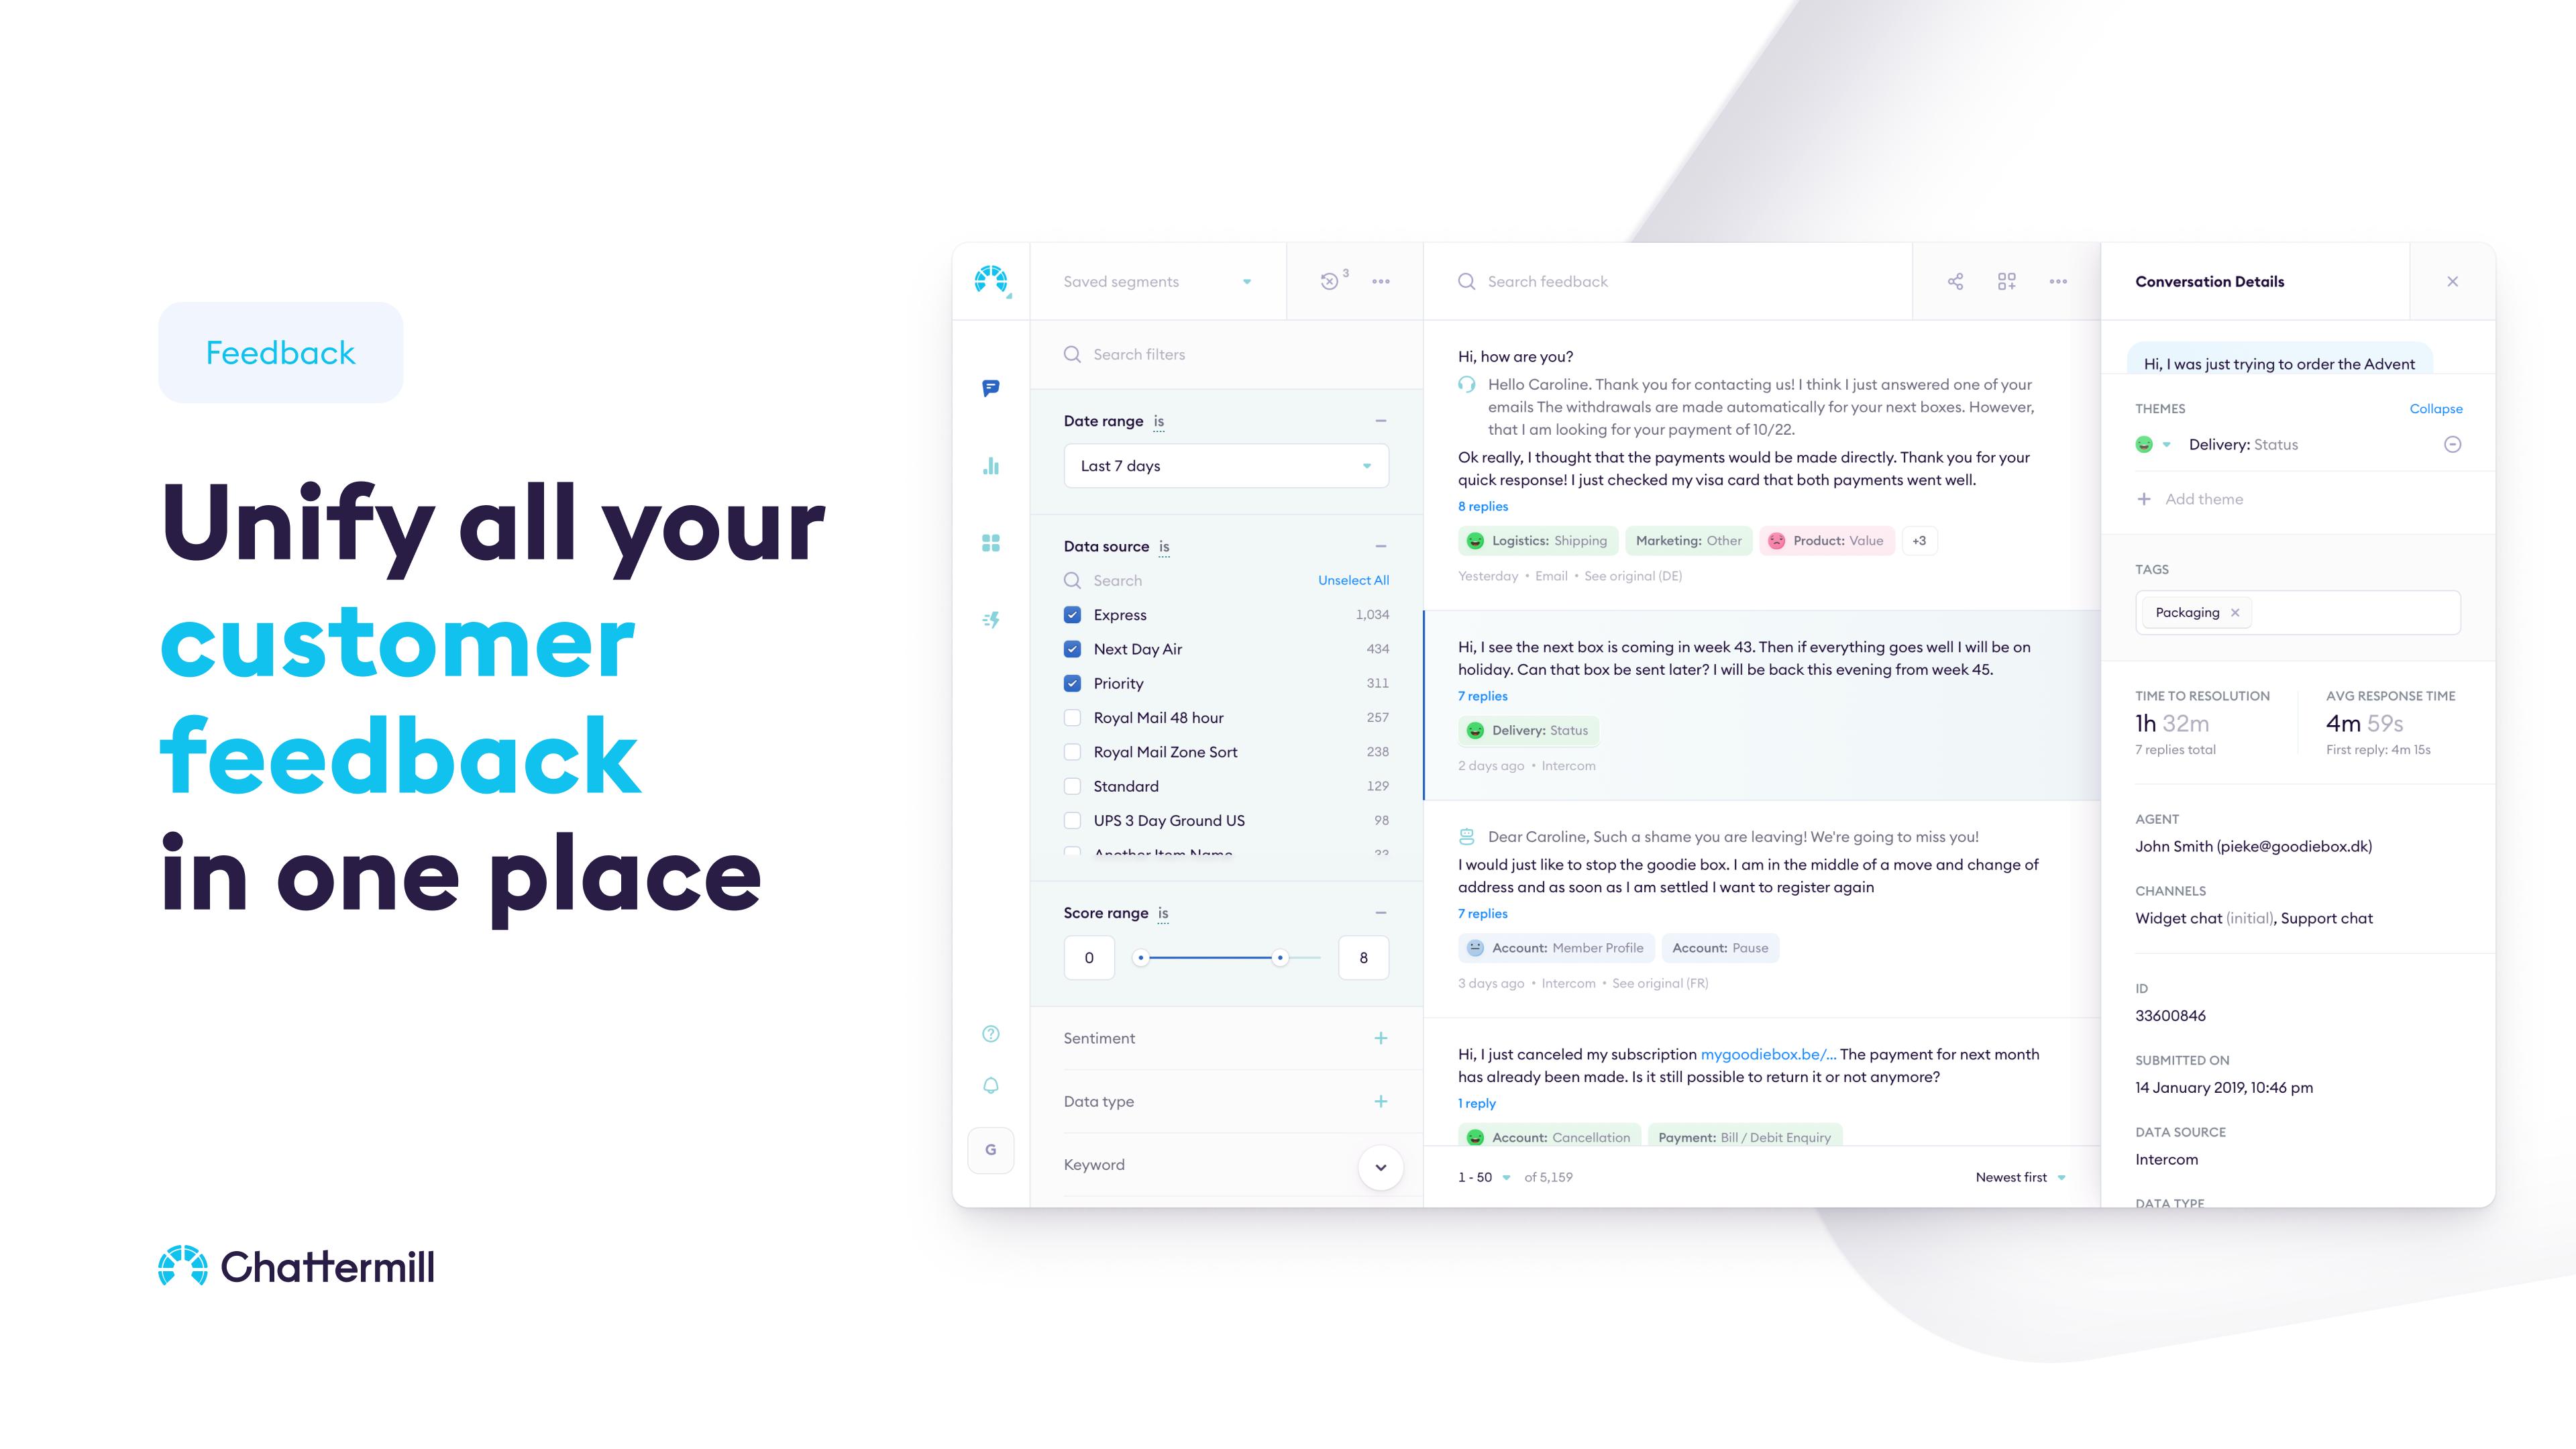 Zendesk support tickets, customer surveys, and Google Play reviews all contain valuable feedback, product improvement ideas, and customer requests. Consolidate them in one place using Chattermill.